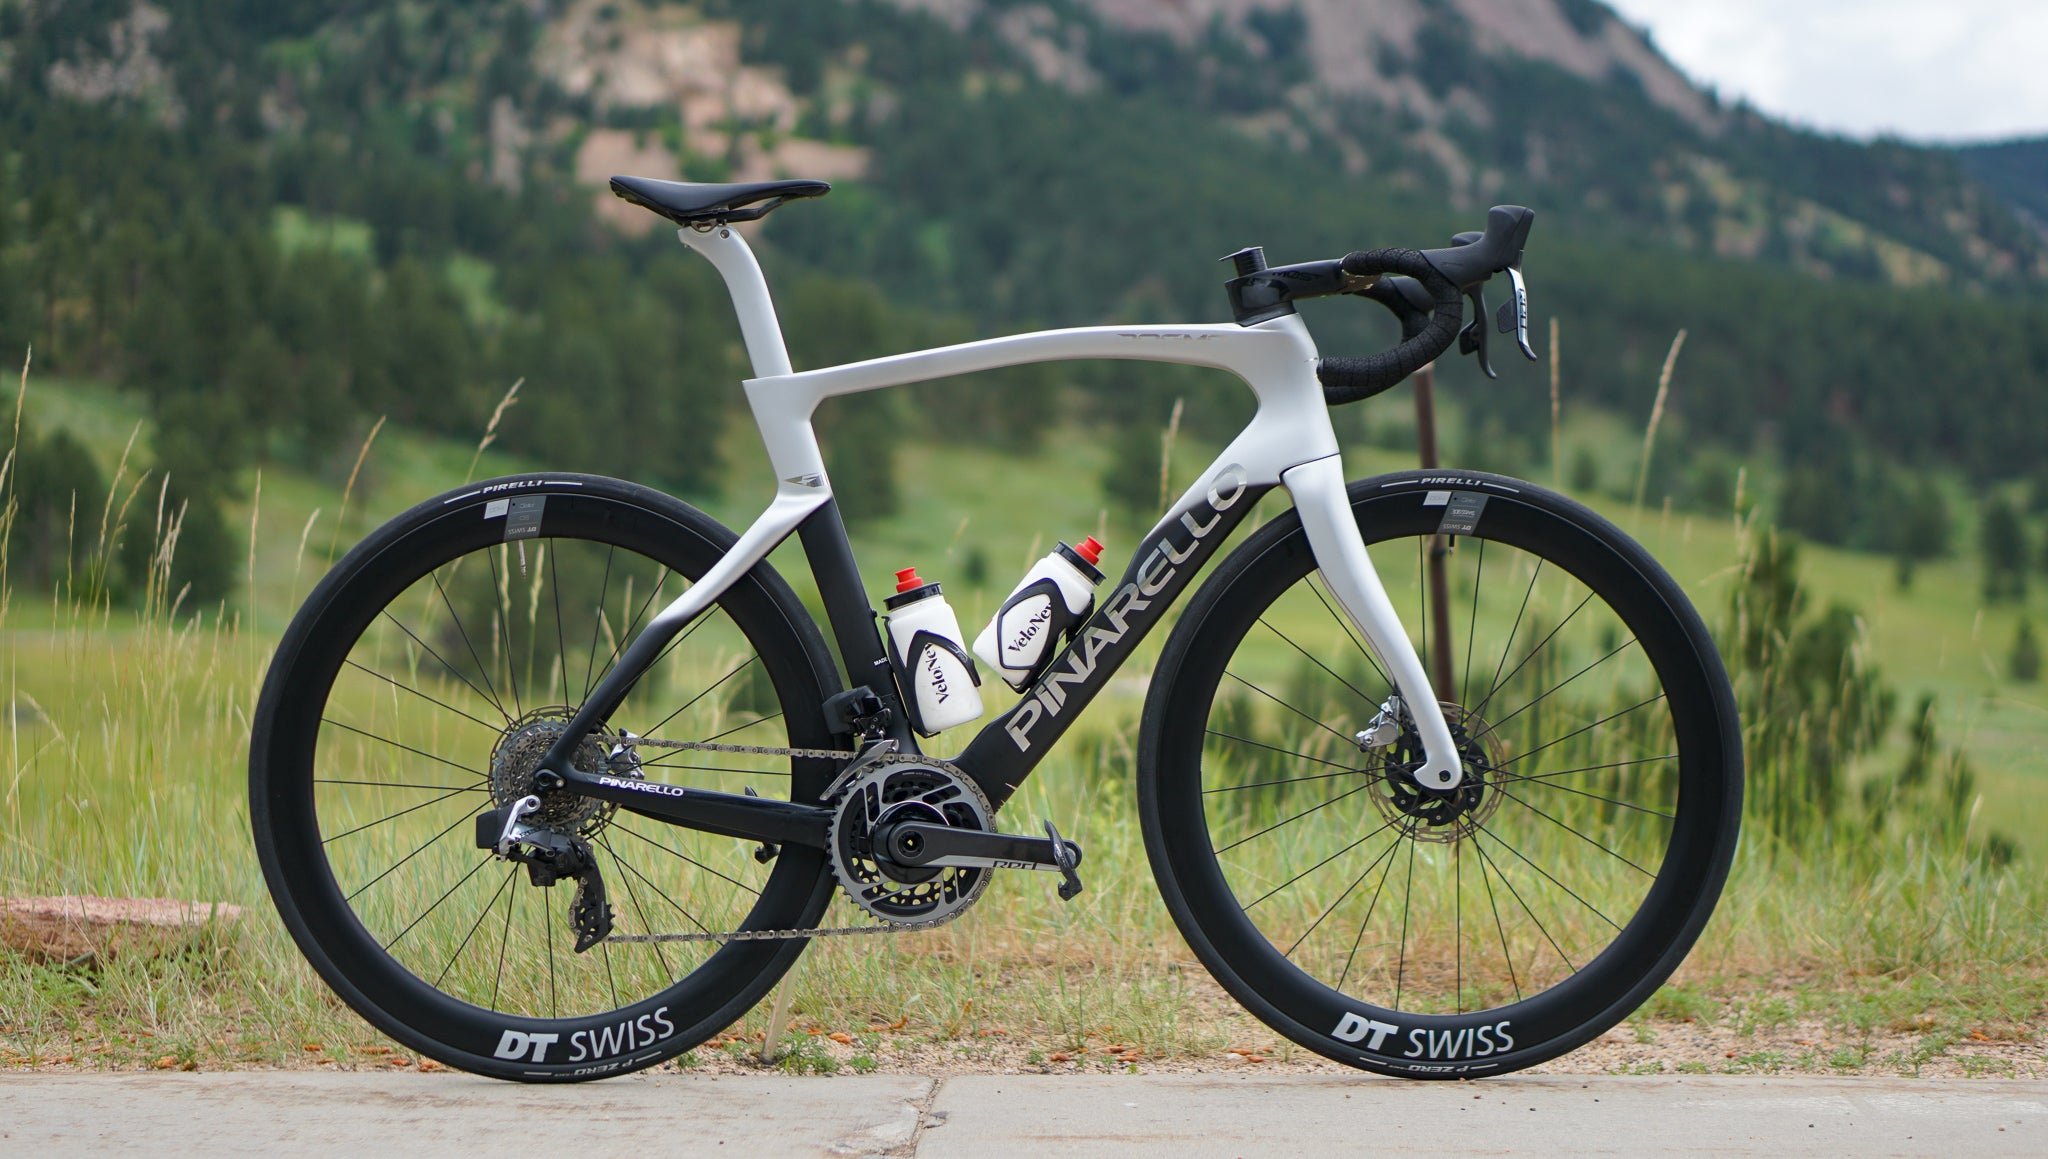 Pinarello Dogma F review: A serious superbike with an equally